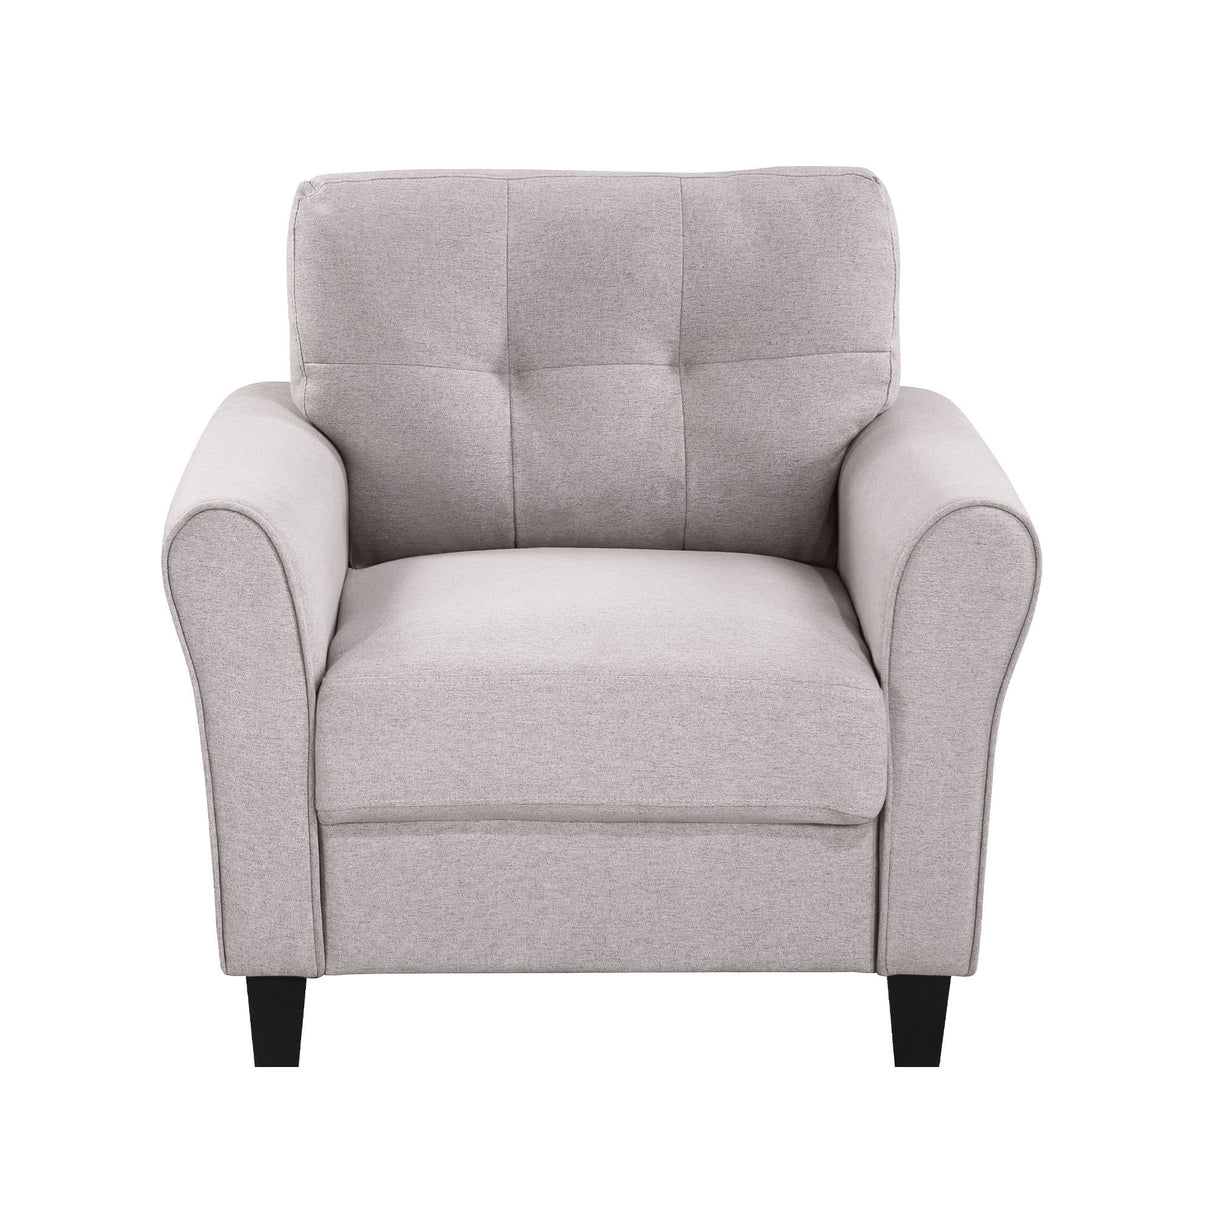 35" Modern Living Room Armchair Linen Upholstered Couch Furniture for Home or Office ,Light Grey,(1-Seat,Old Sku:WF288517AAR) Home Elegance USA